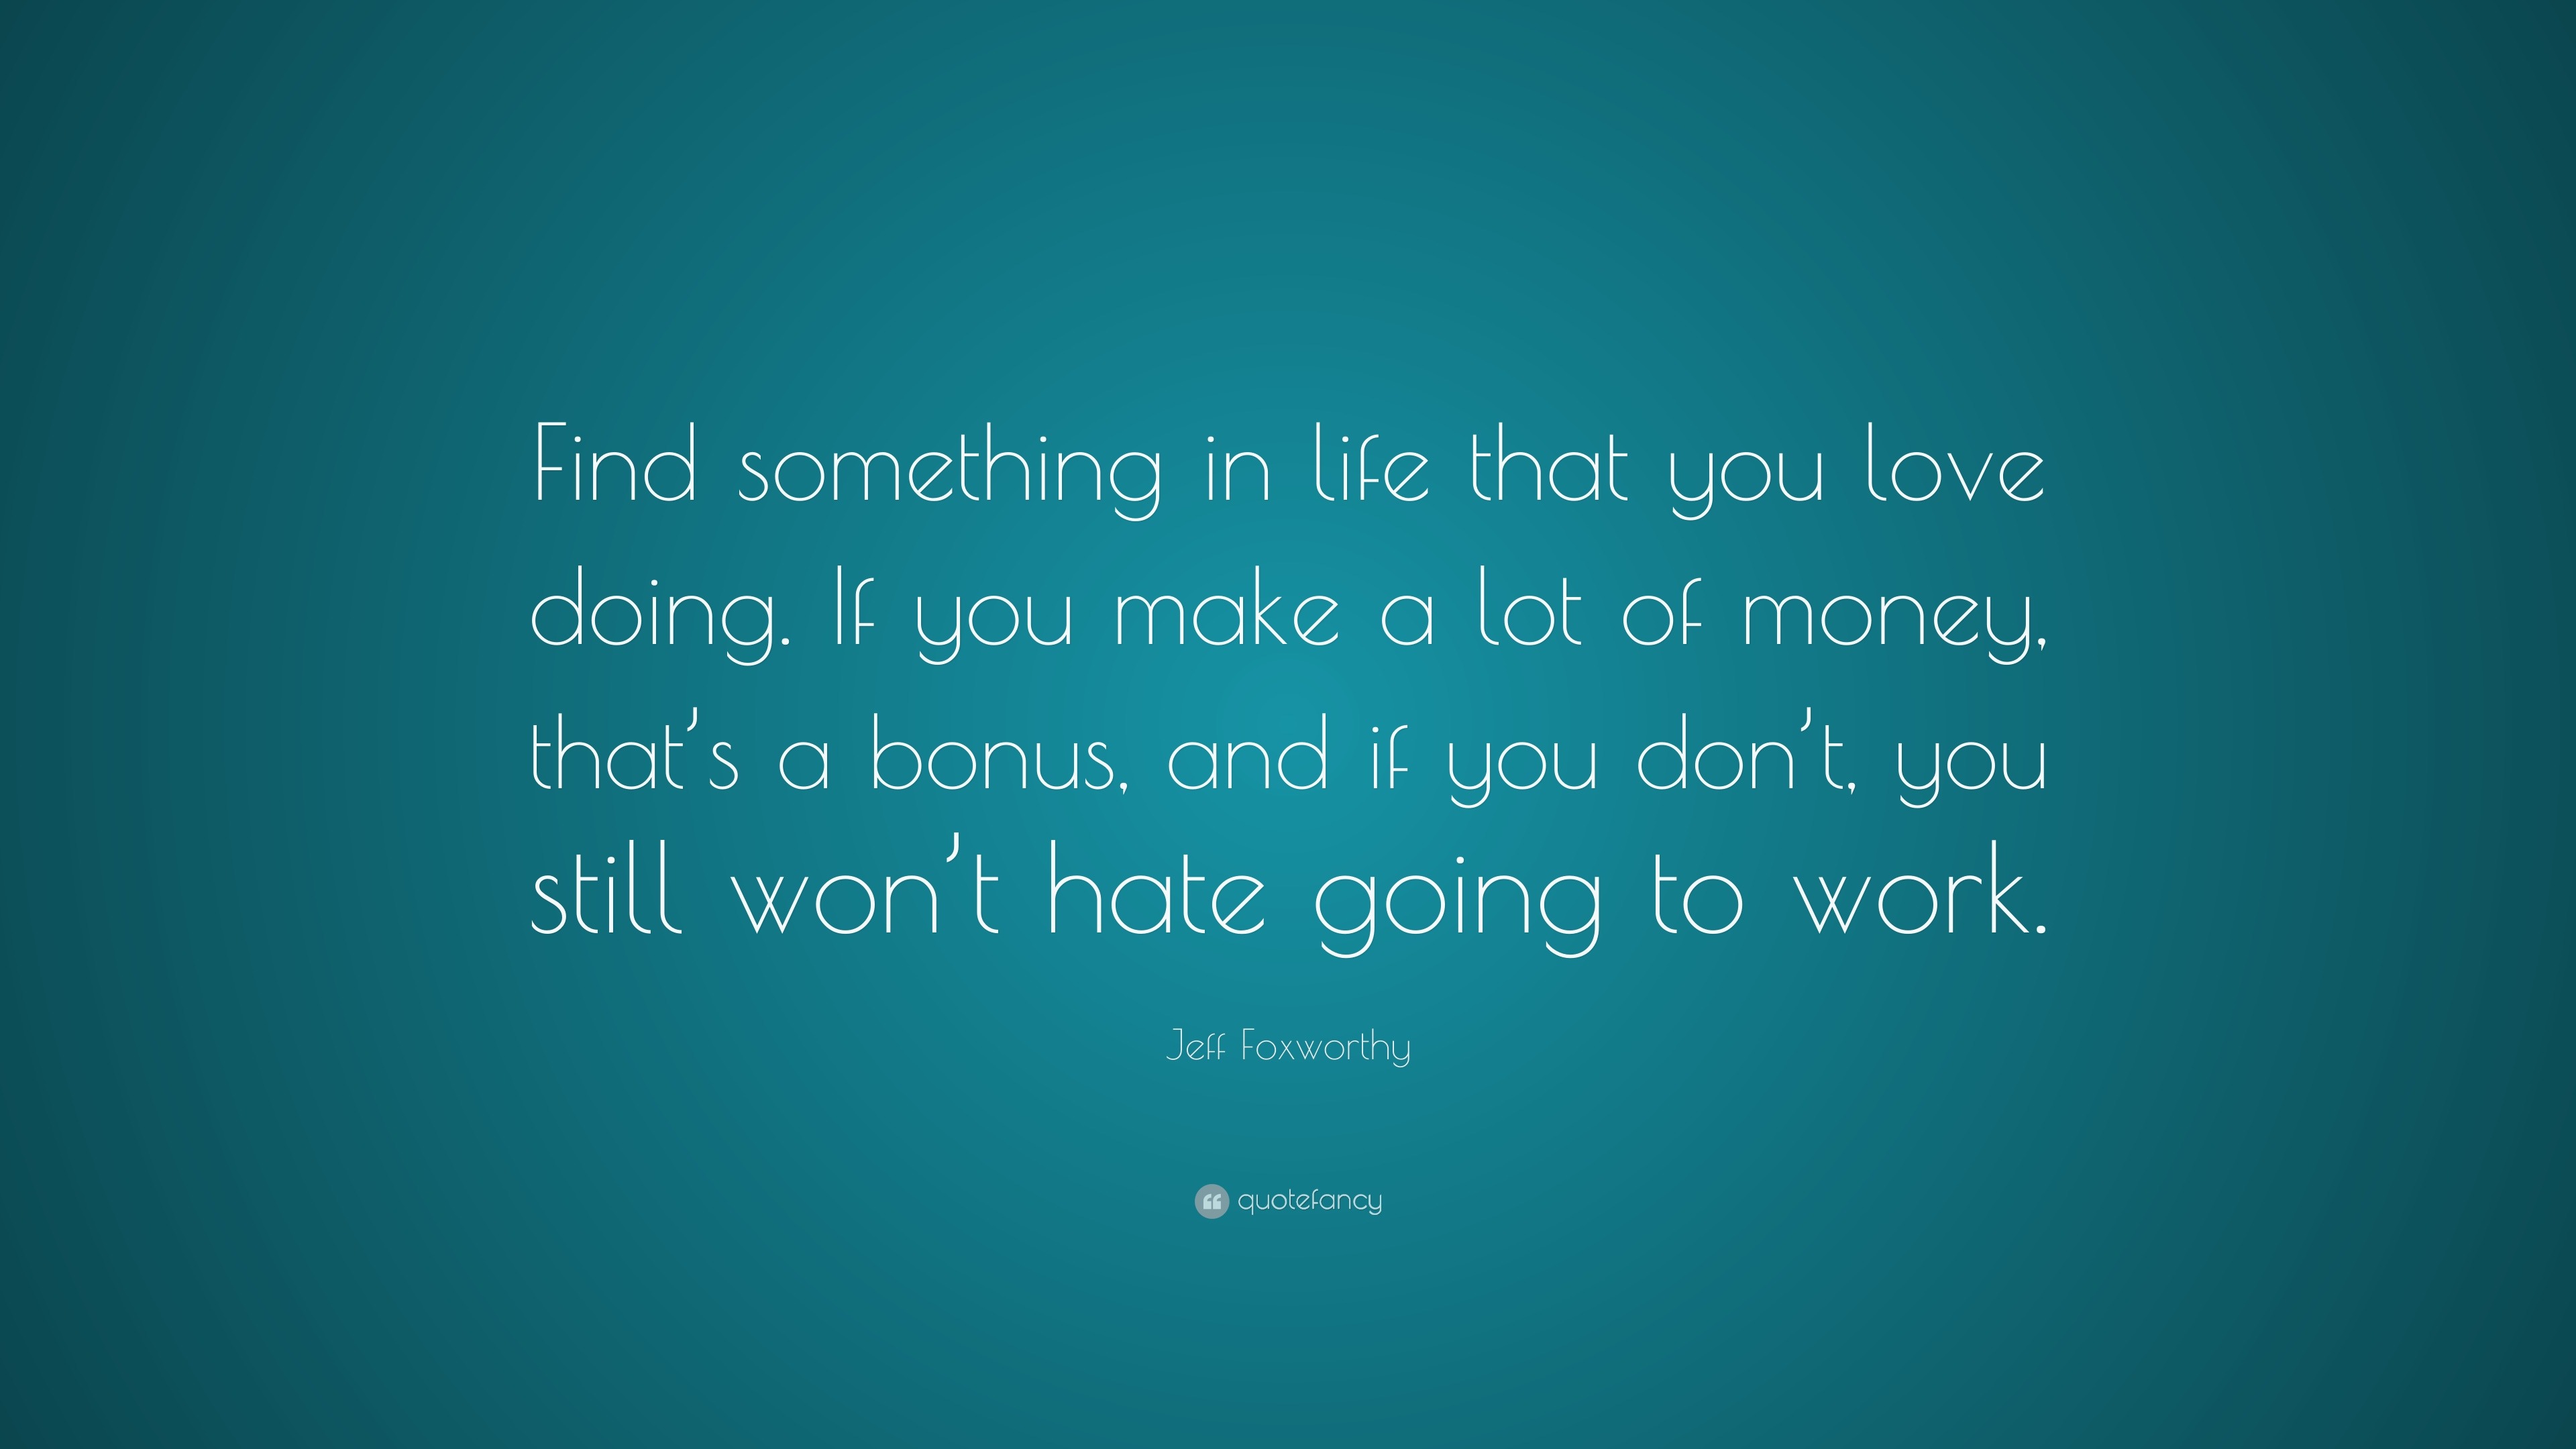 Jeff Foxworthy Quote “Find something in life that you love doing If you